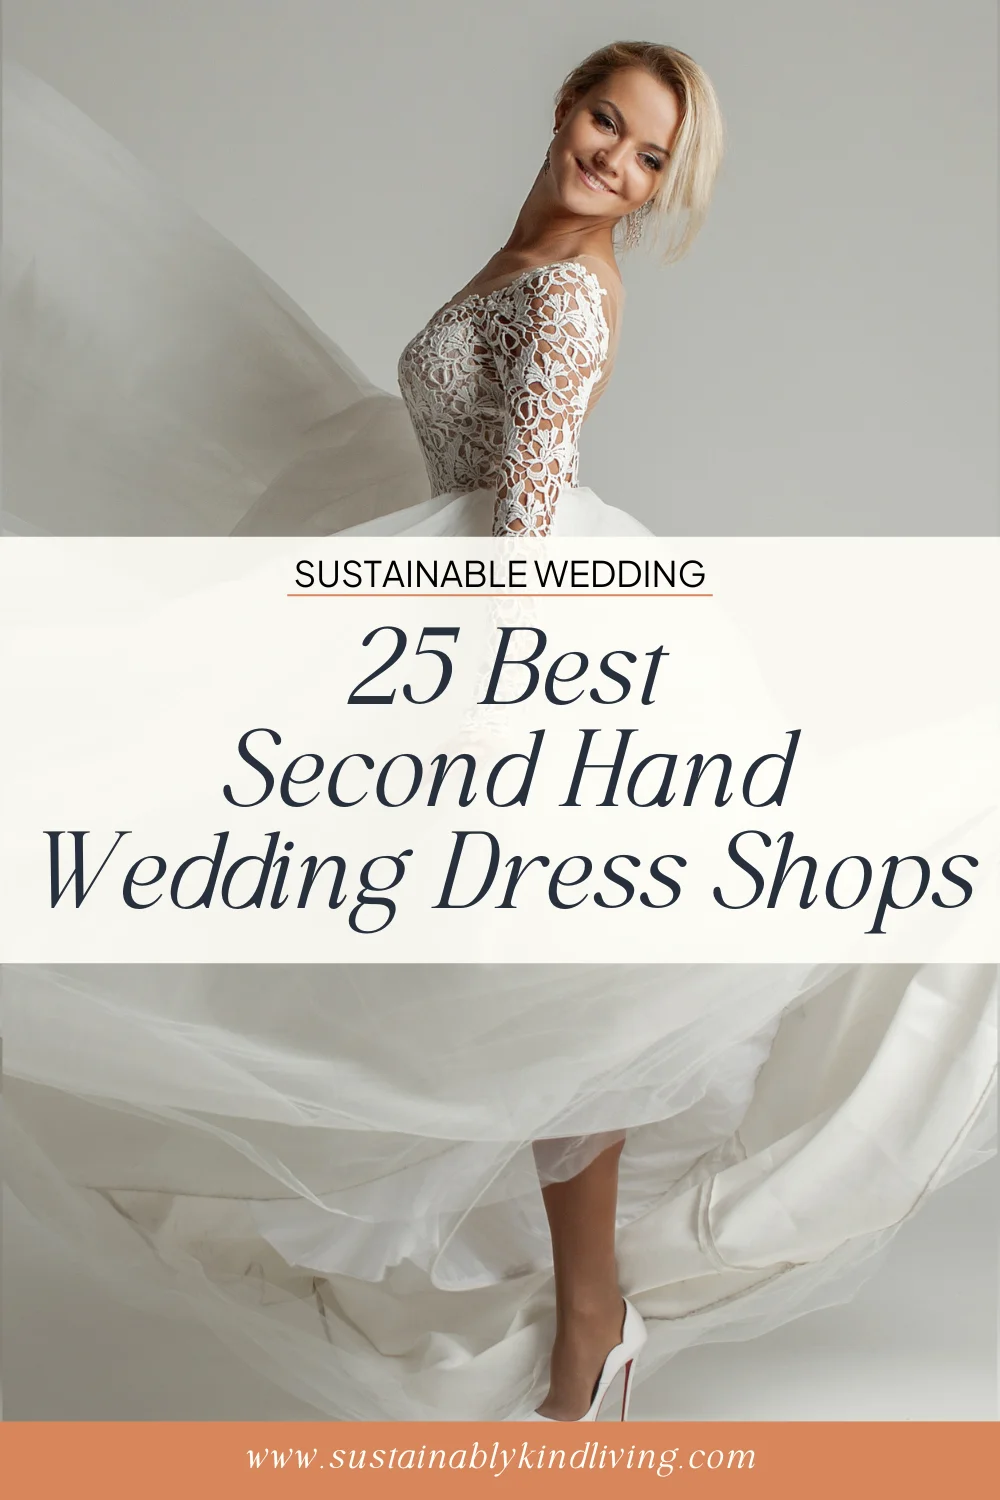 Ethical wedding dress consignment stores